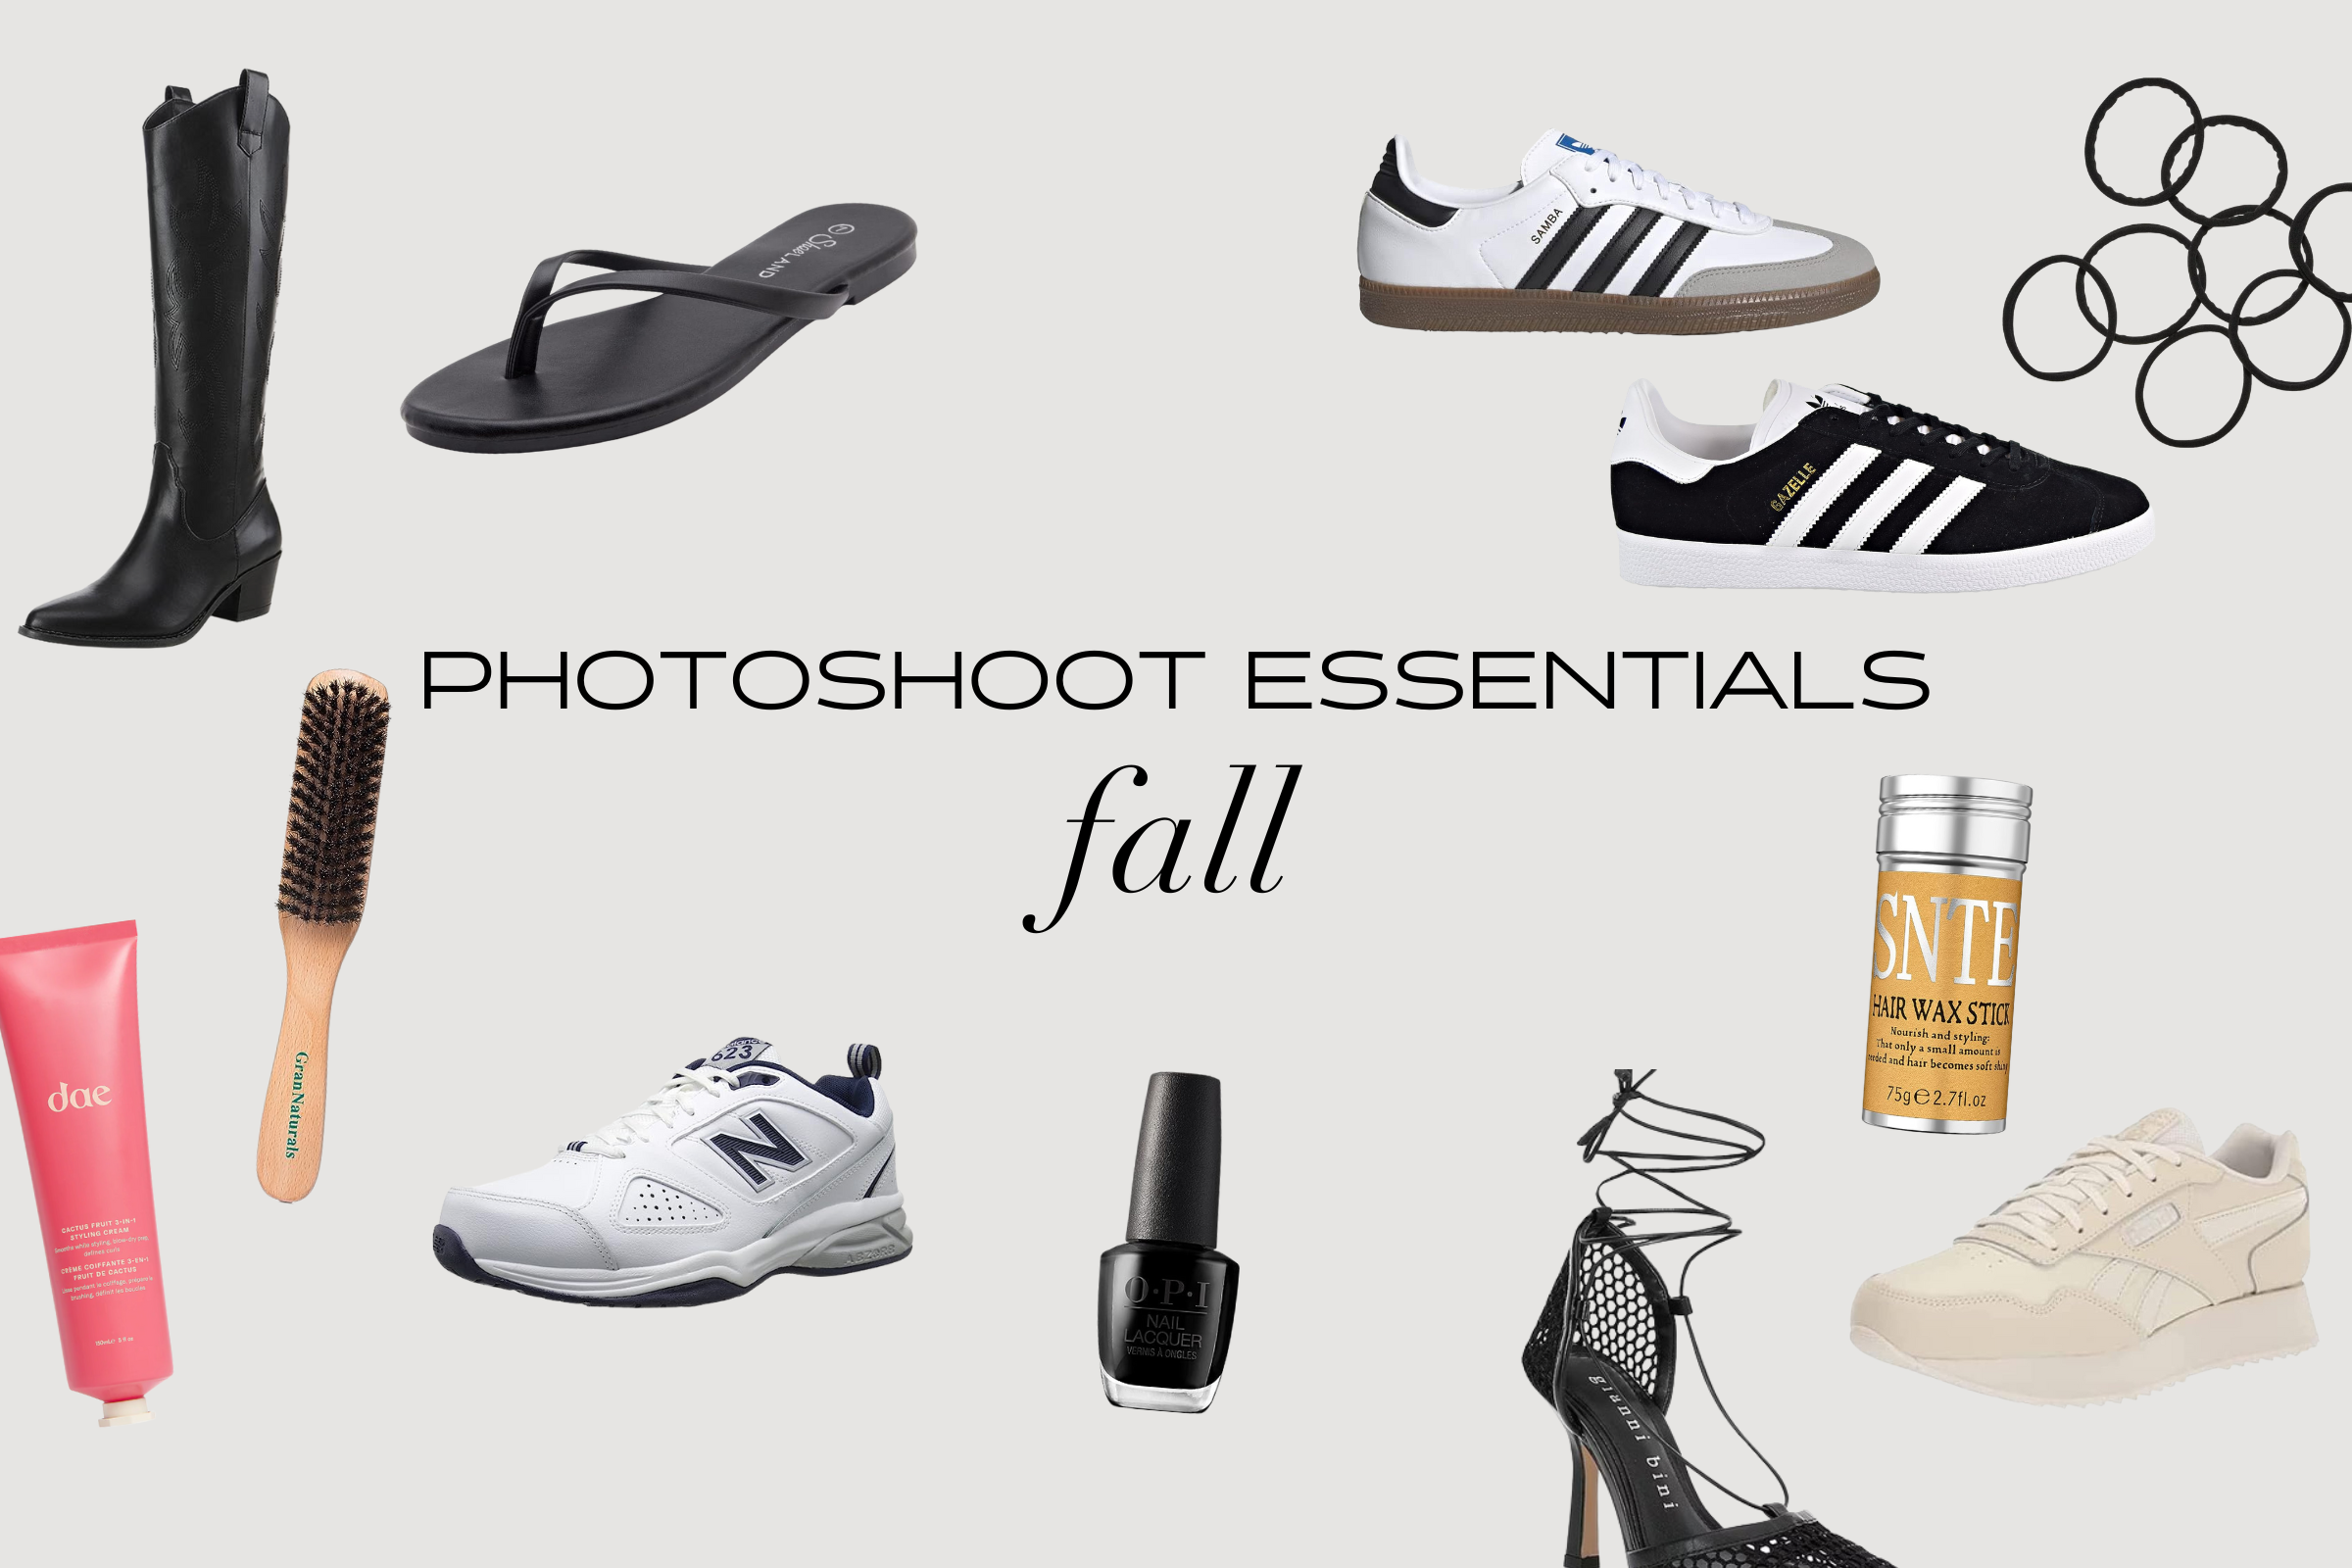 Fall Photoshoot Essentials  THELIFESTYLEDCO - THELIFESTYLEDCO Shop